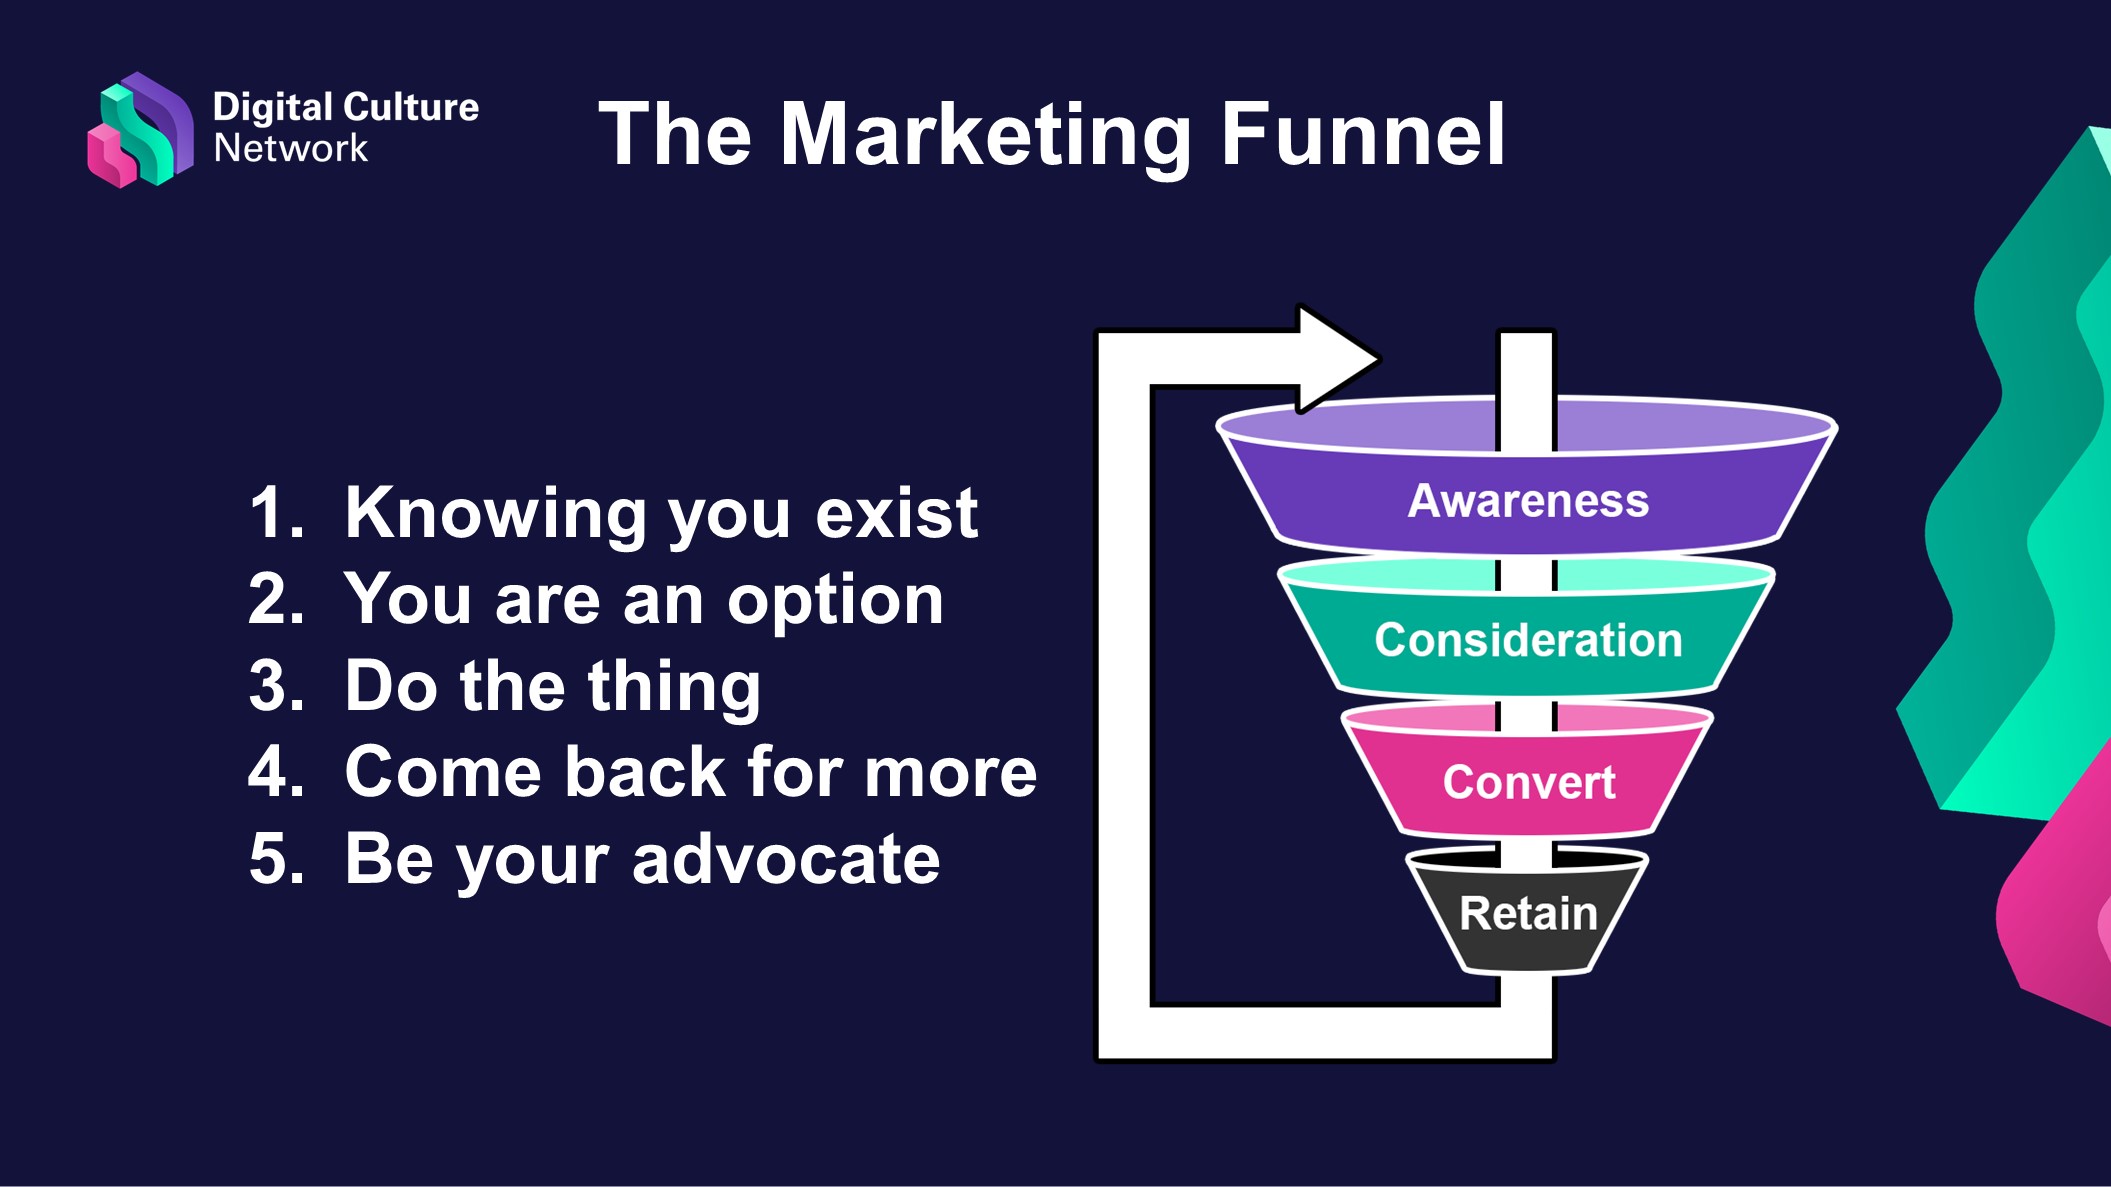 A funnel diagram showing the stages of Awareness, Considerations, Conversion and Retention